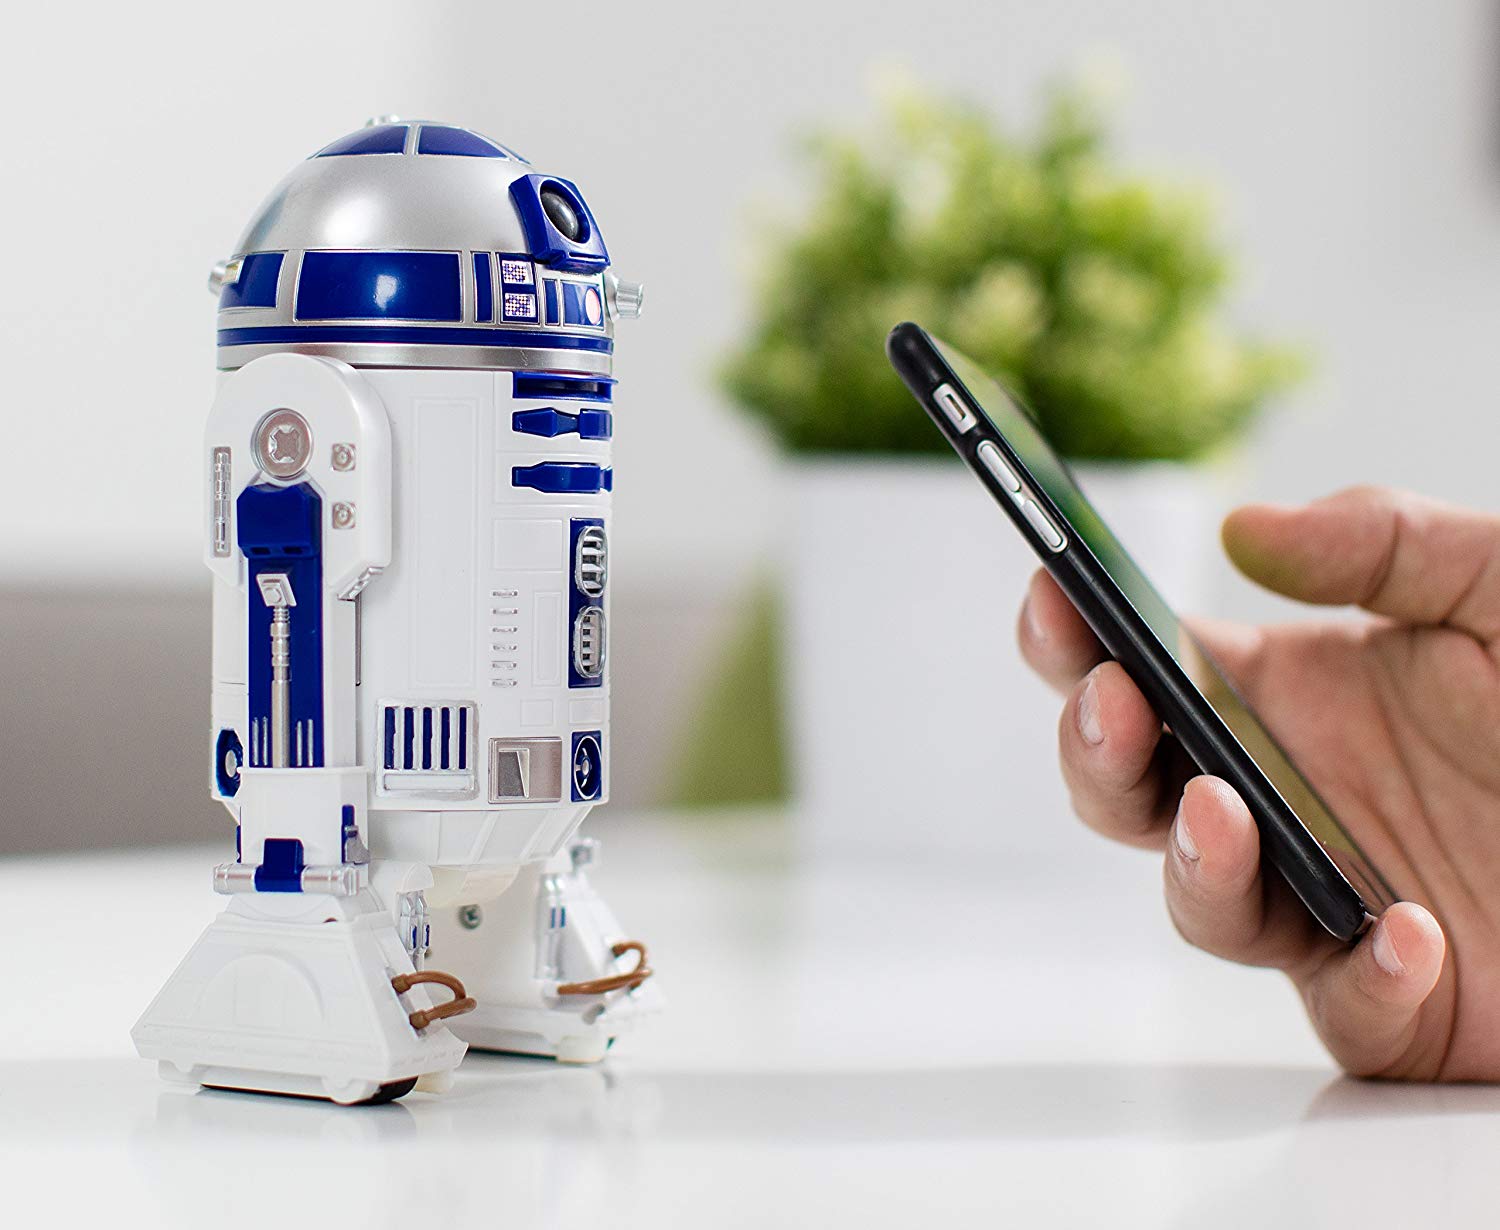 Prime Day 2019 Deals: Sphero 'Star Wars' Droids Are On Sale!